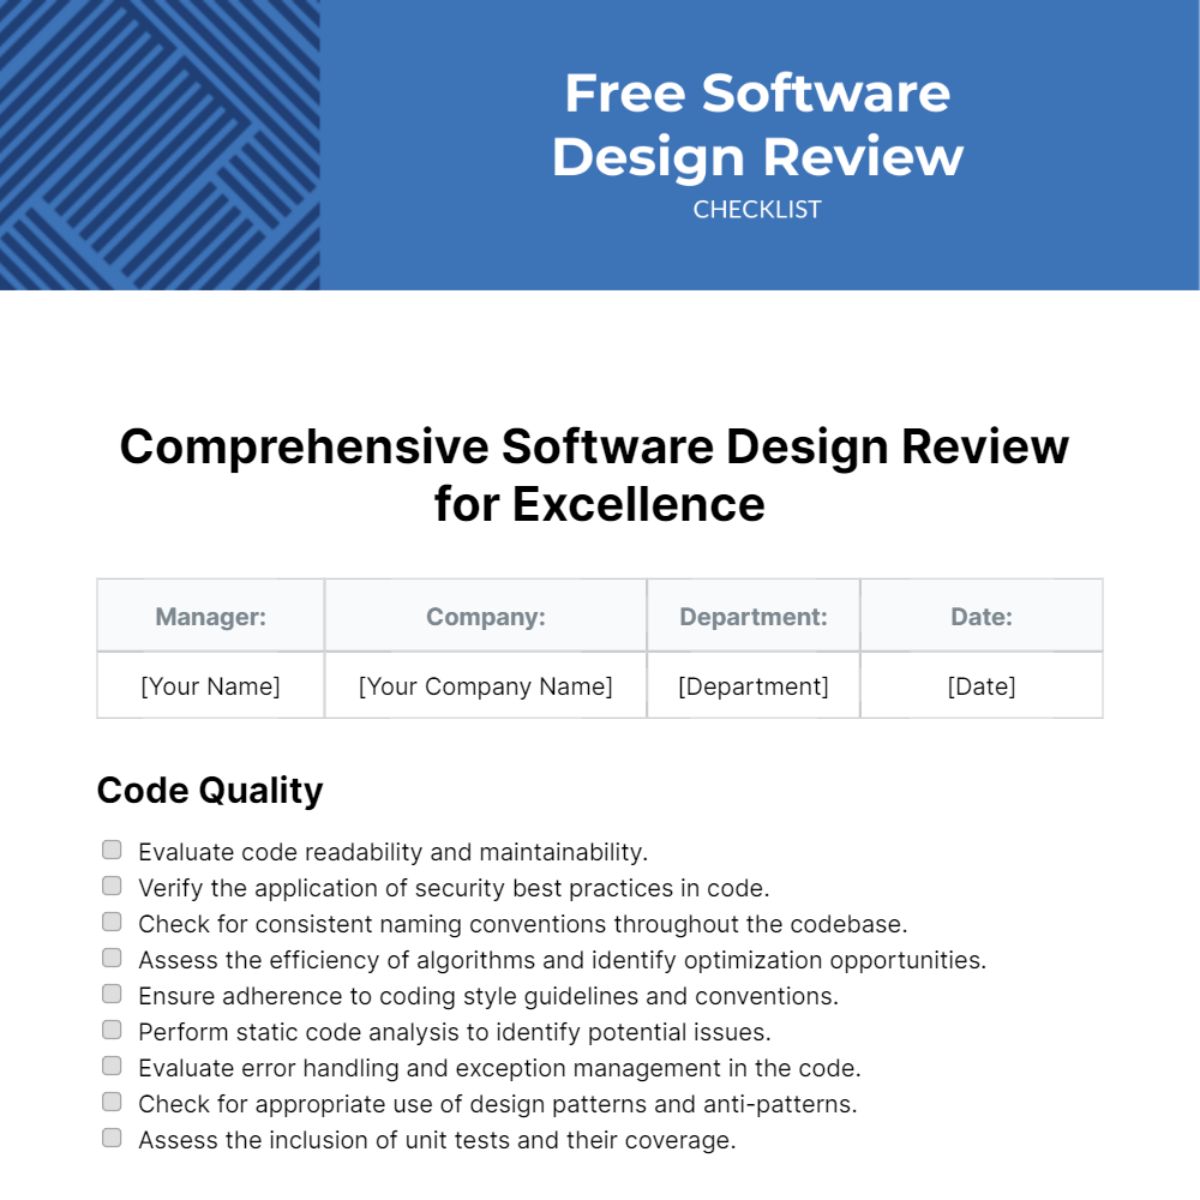 Free Software Design Review Checklist Template